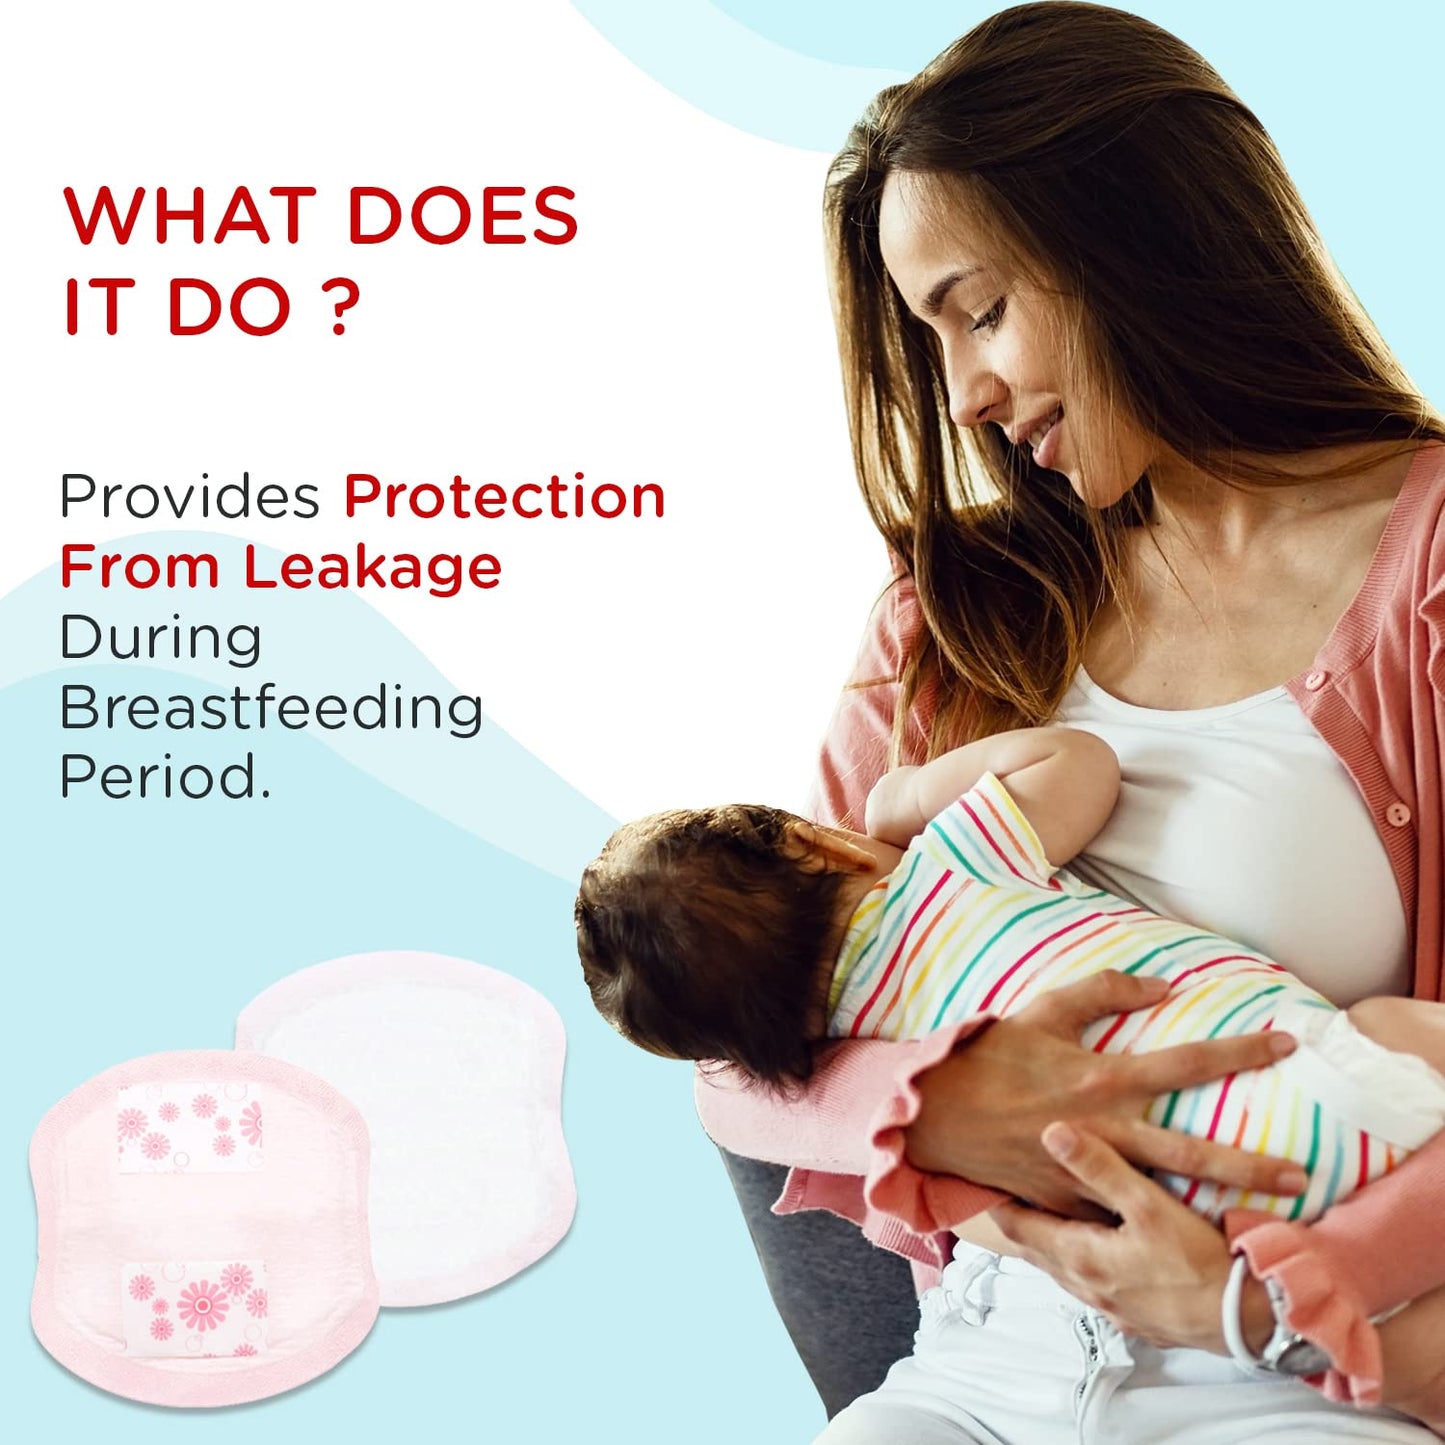 Mee Mee Ultra Thin Super Absorbent Disposable Breast Pads